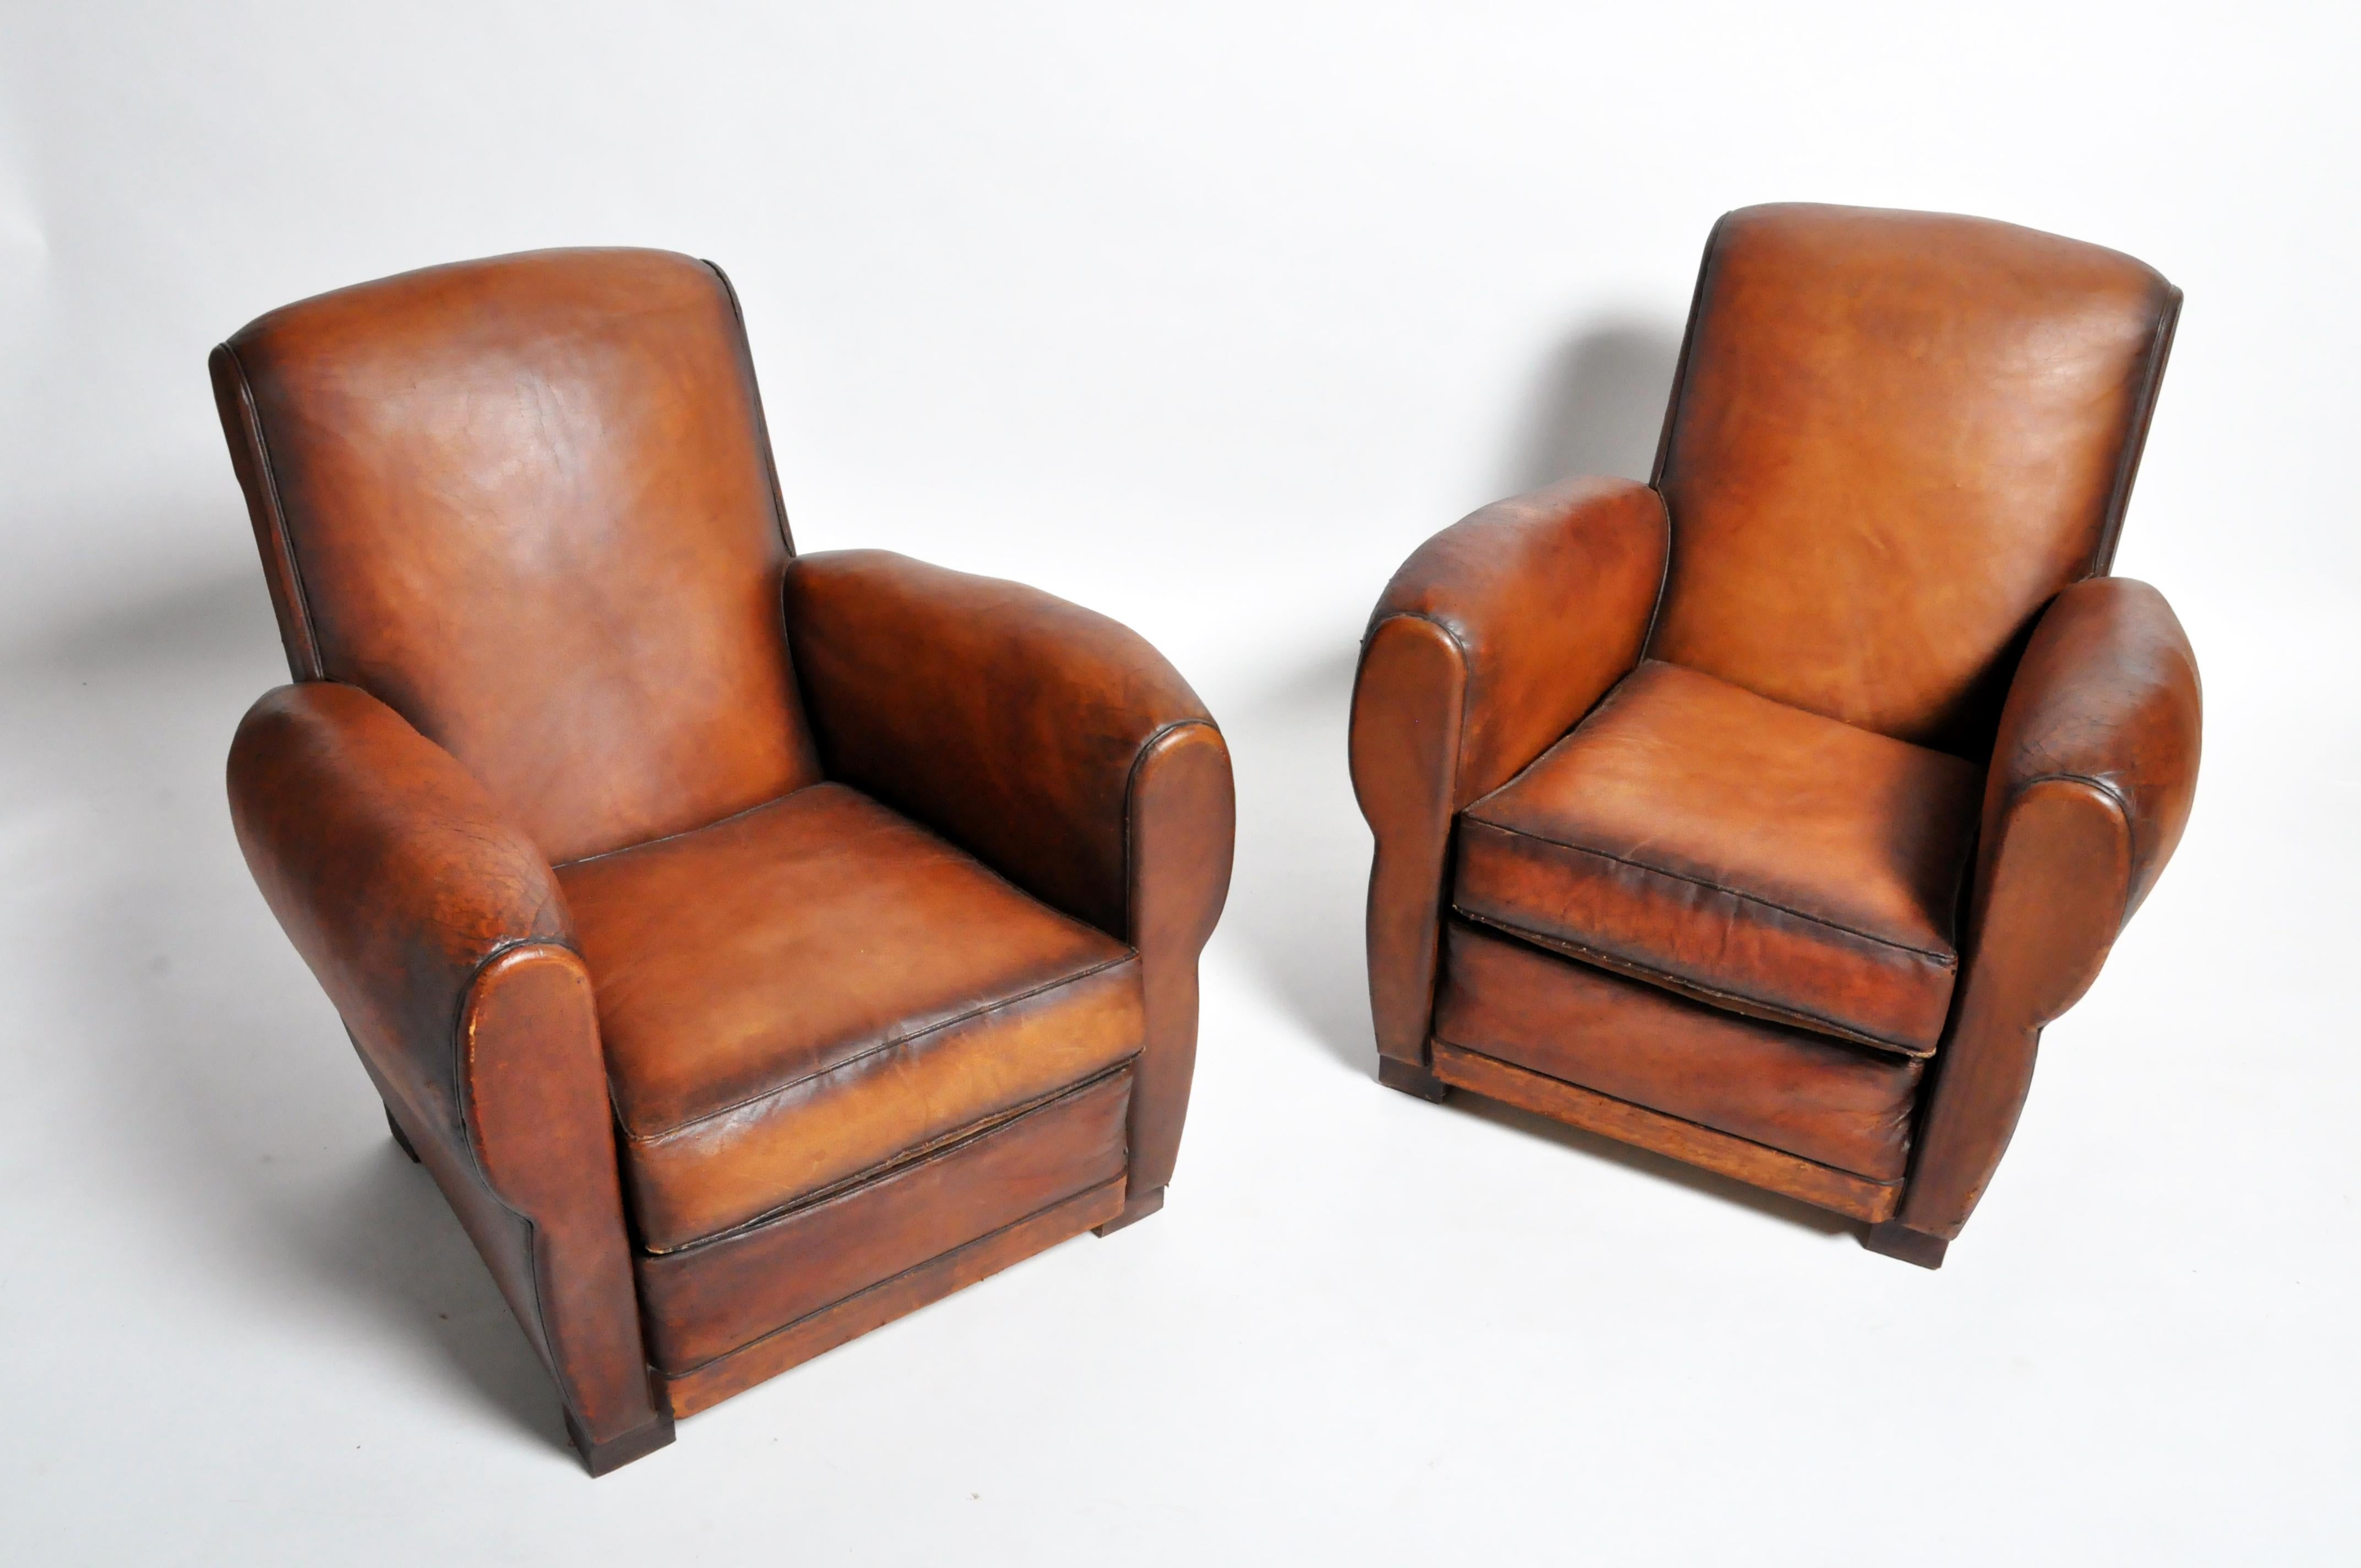 Handsome pair of club chairs from France made from leather and wood, circa 1950. Stylish and comfortable the chairs are sturdy and ready for daily use. Wear consistent with age and use.